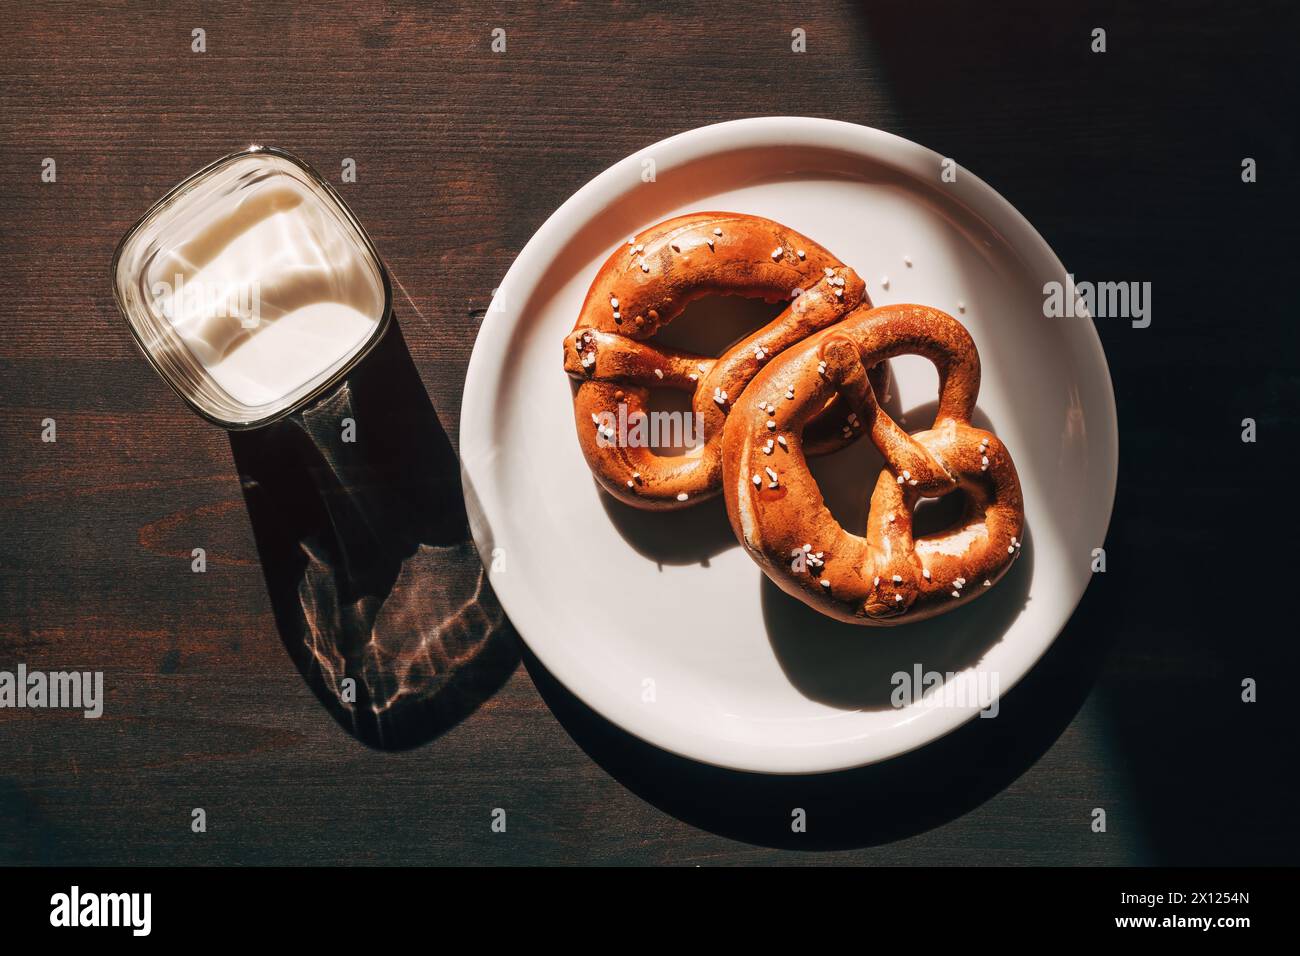 Glass of yoghurt and two pretzels on a plate on the table in the morning, selective focus Stock Photo